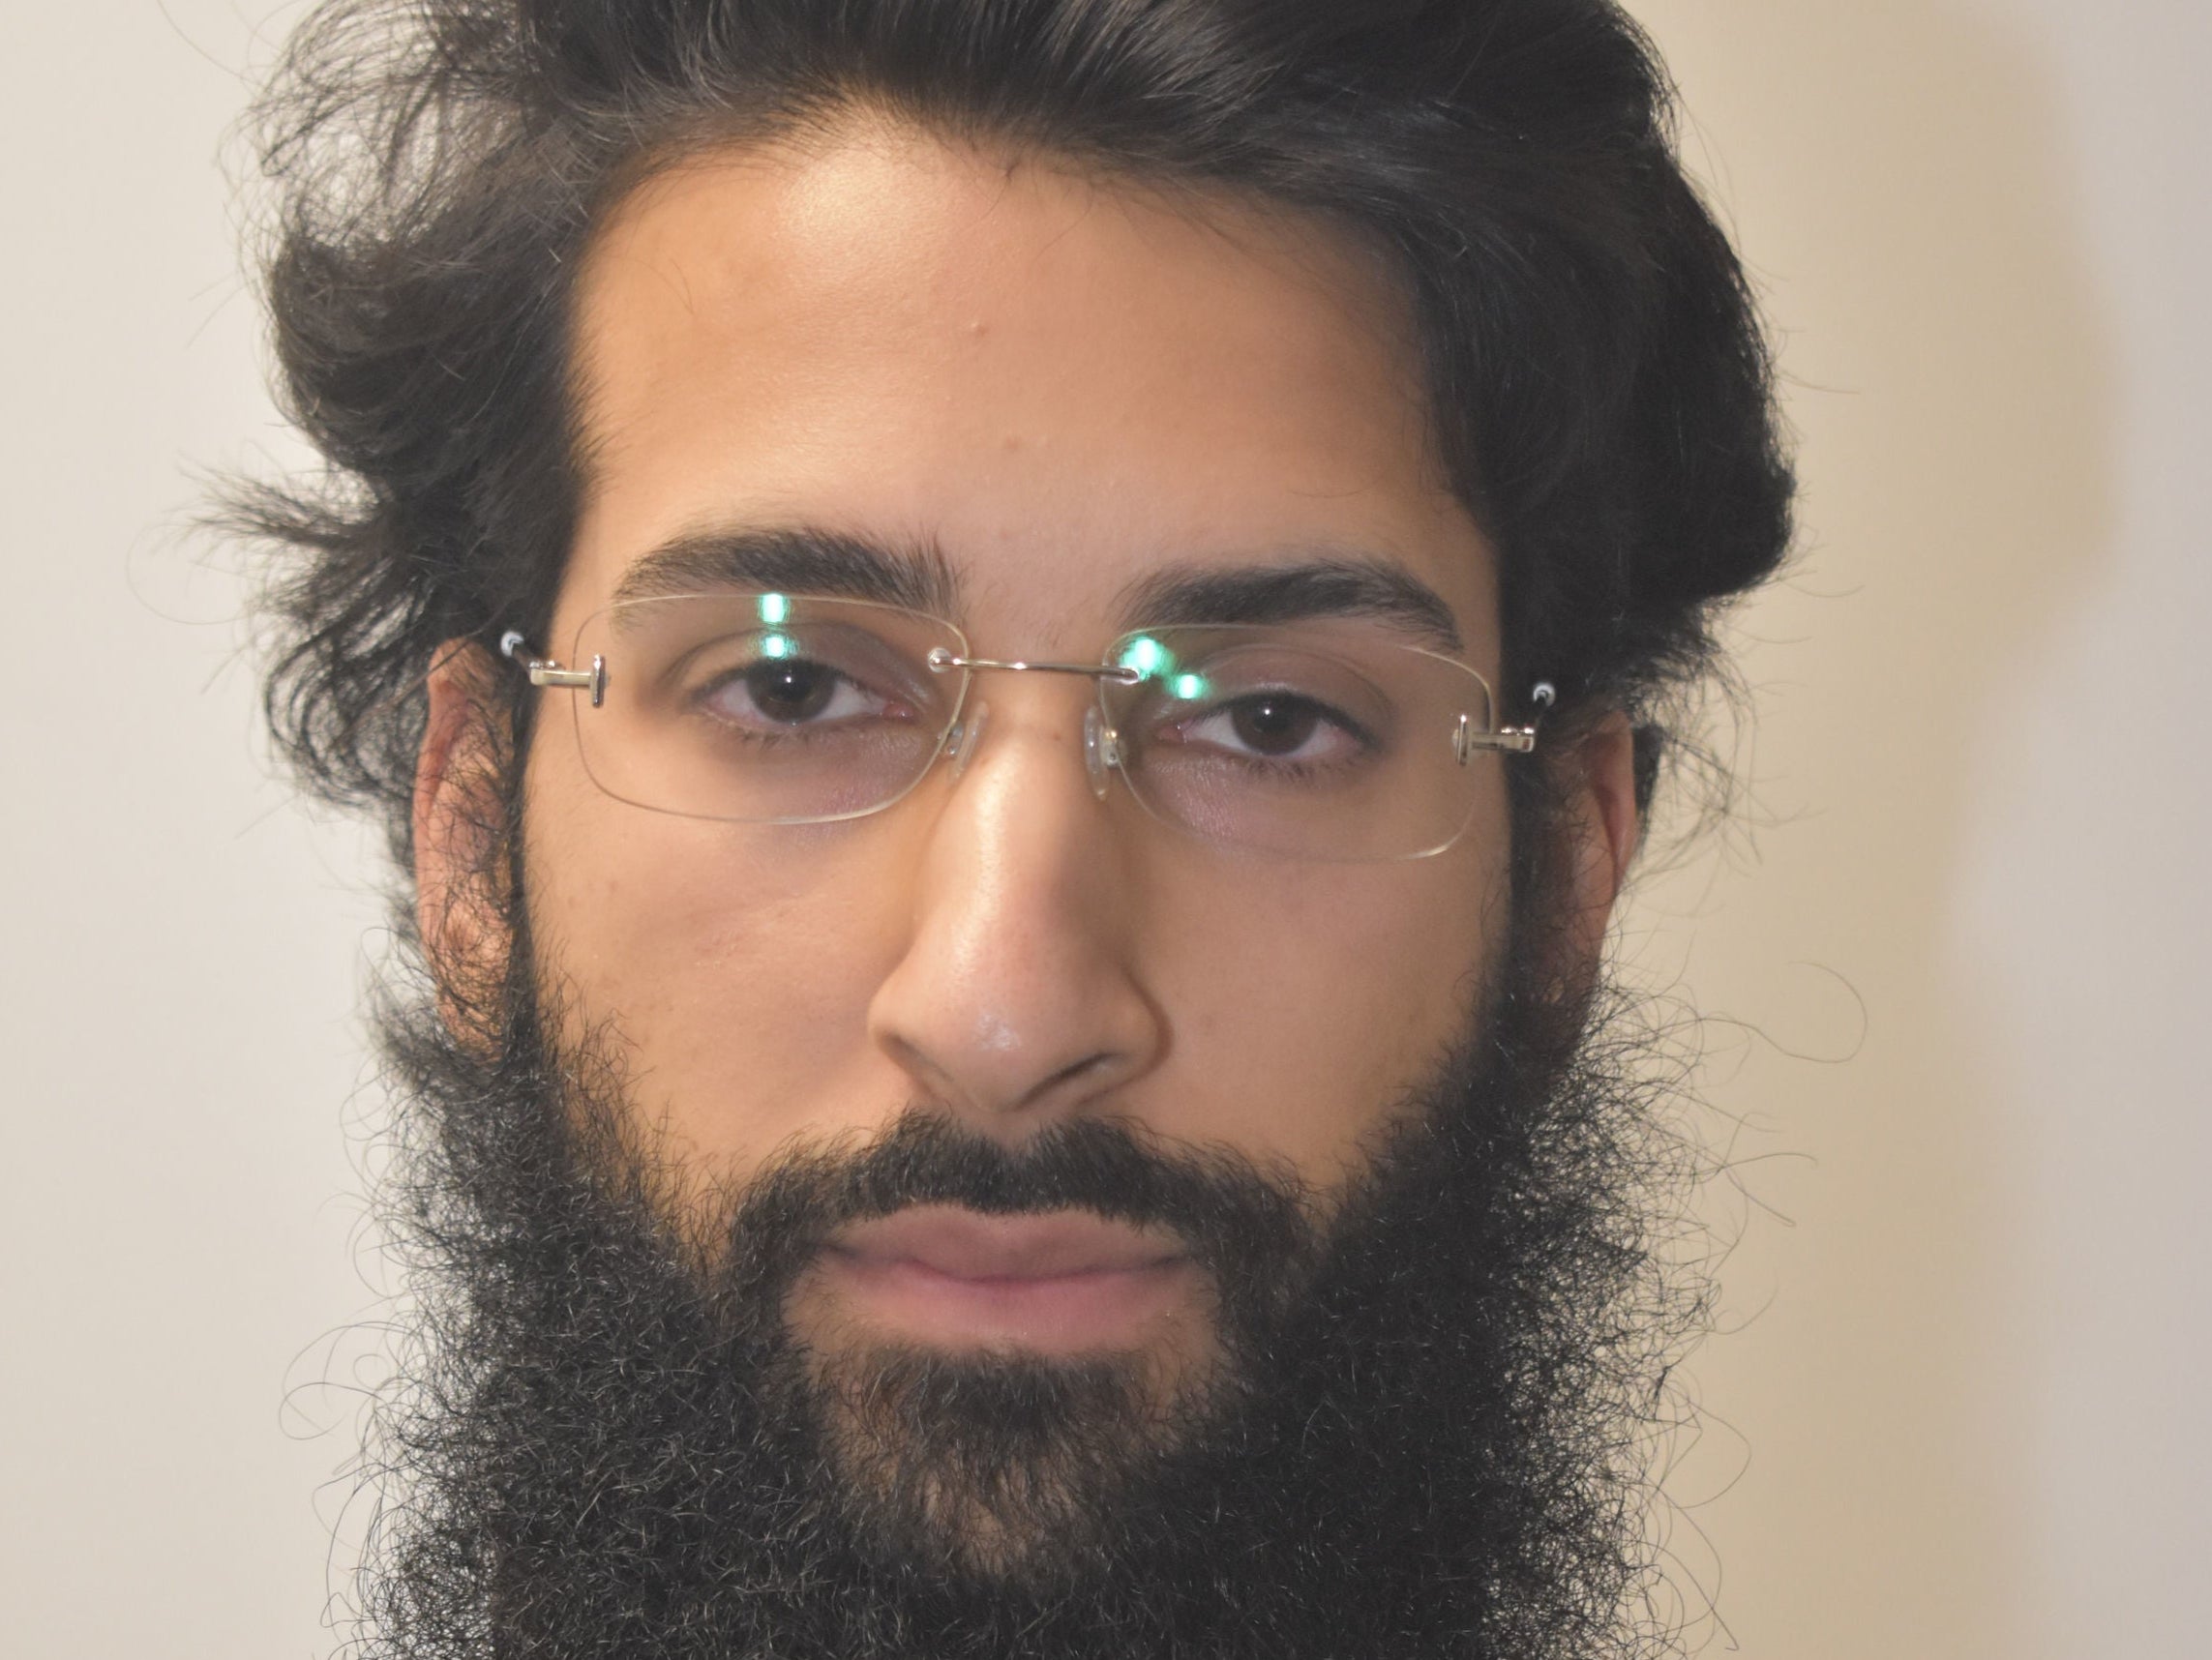 Hisham Chaudhary was convicted of Isis membership and other terror offences